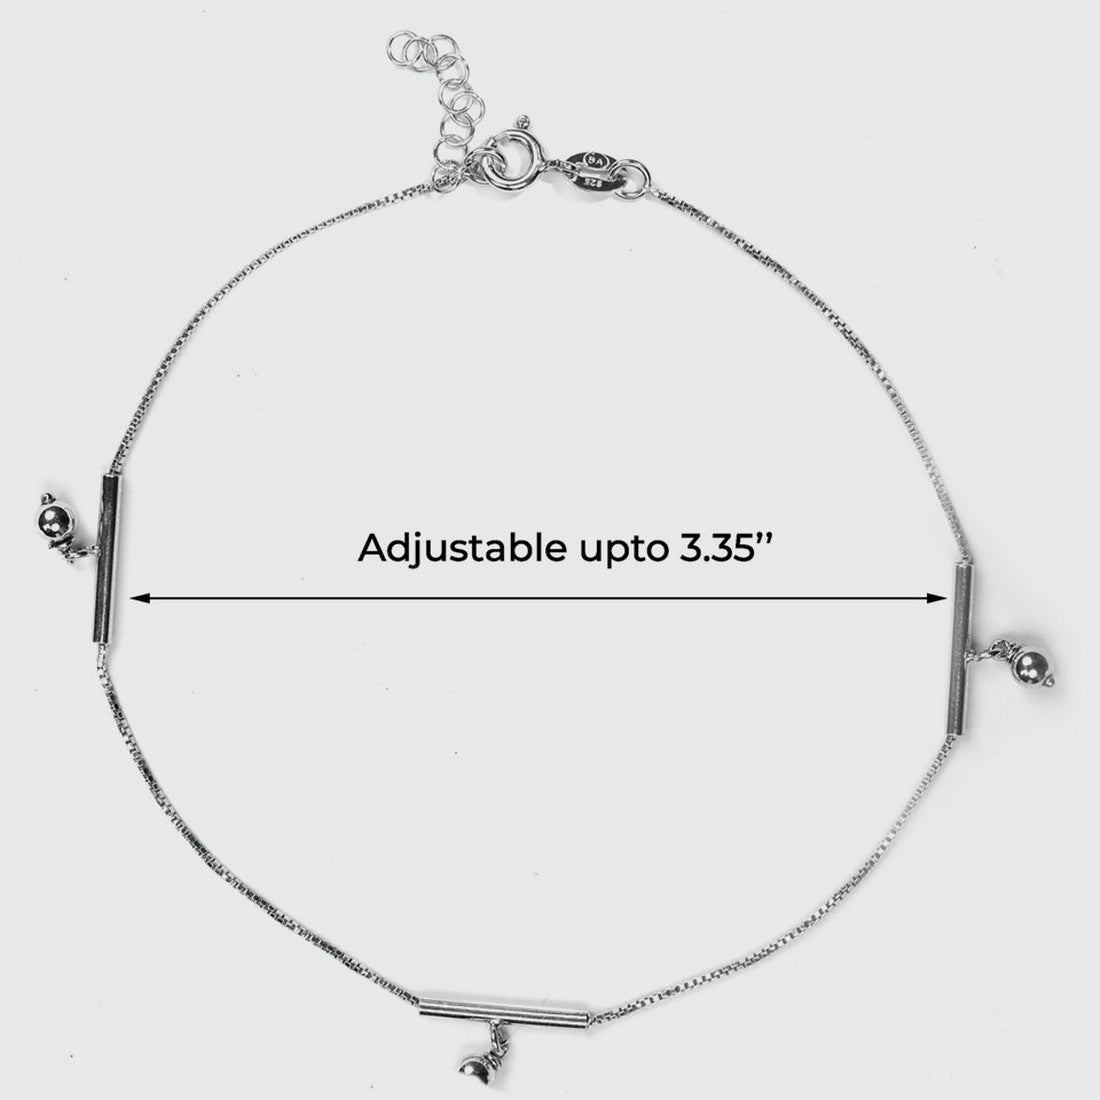 Dangling Charm 925 Silver Anklets